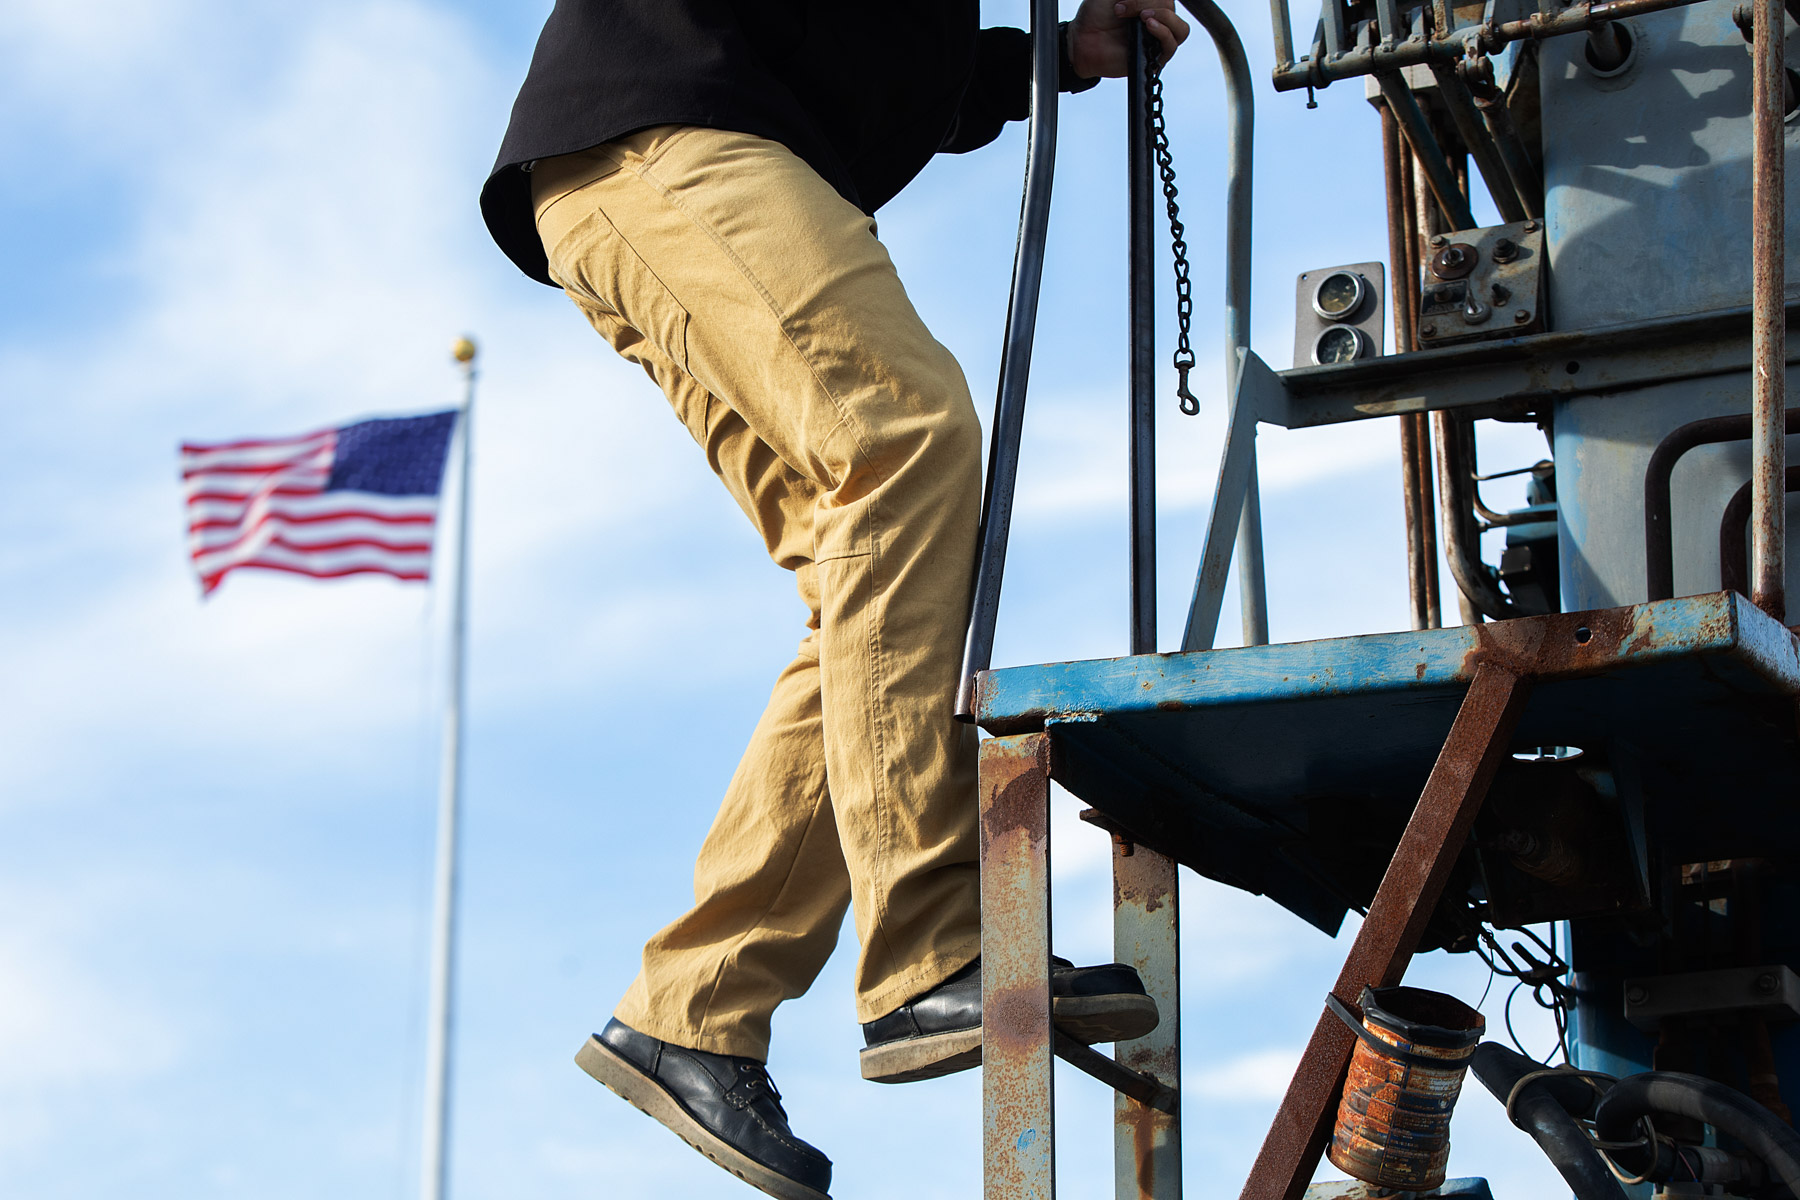 1620 Workwear by Boston based commercial lifestyle and portrait photographer Brian Nevins